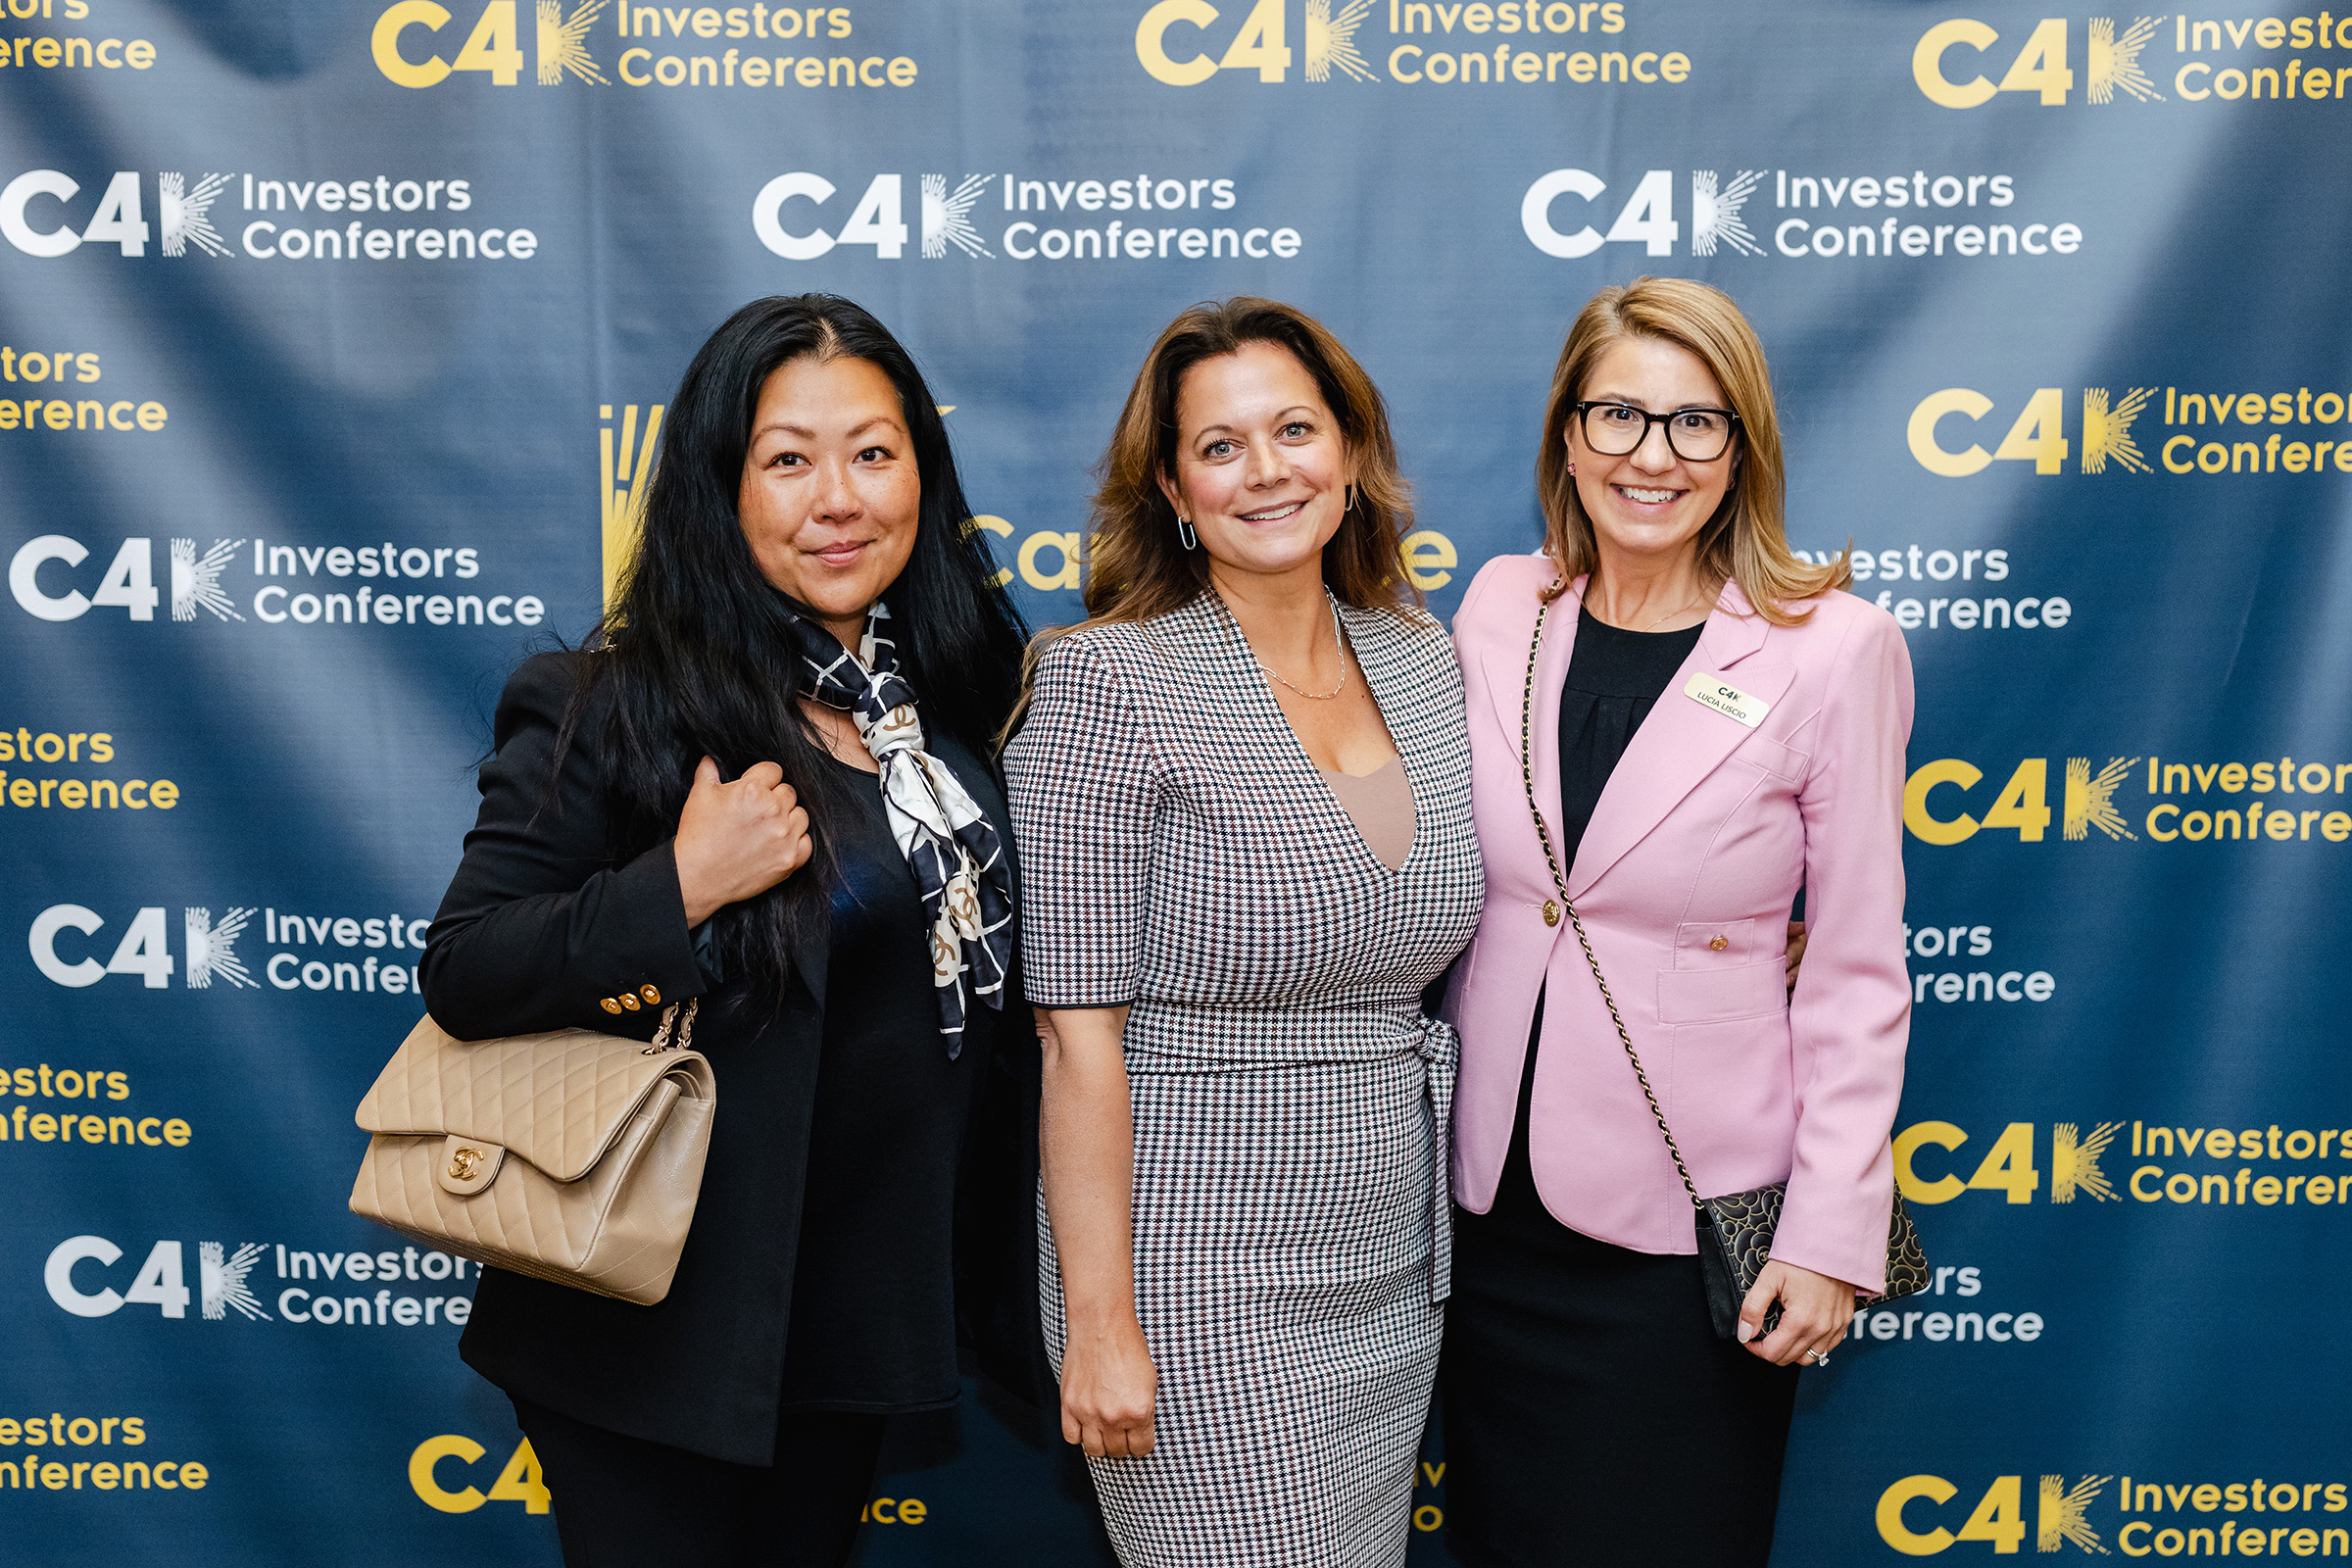 Three women posing for a photo at the event conference.